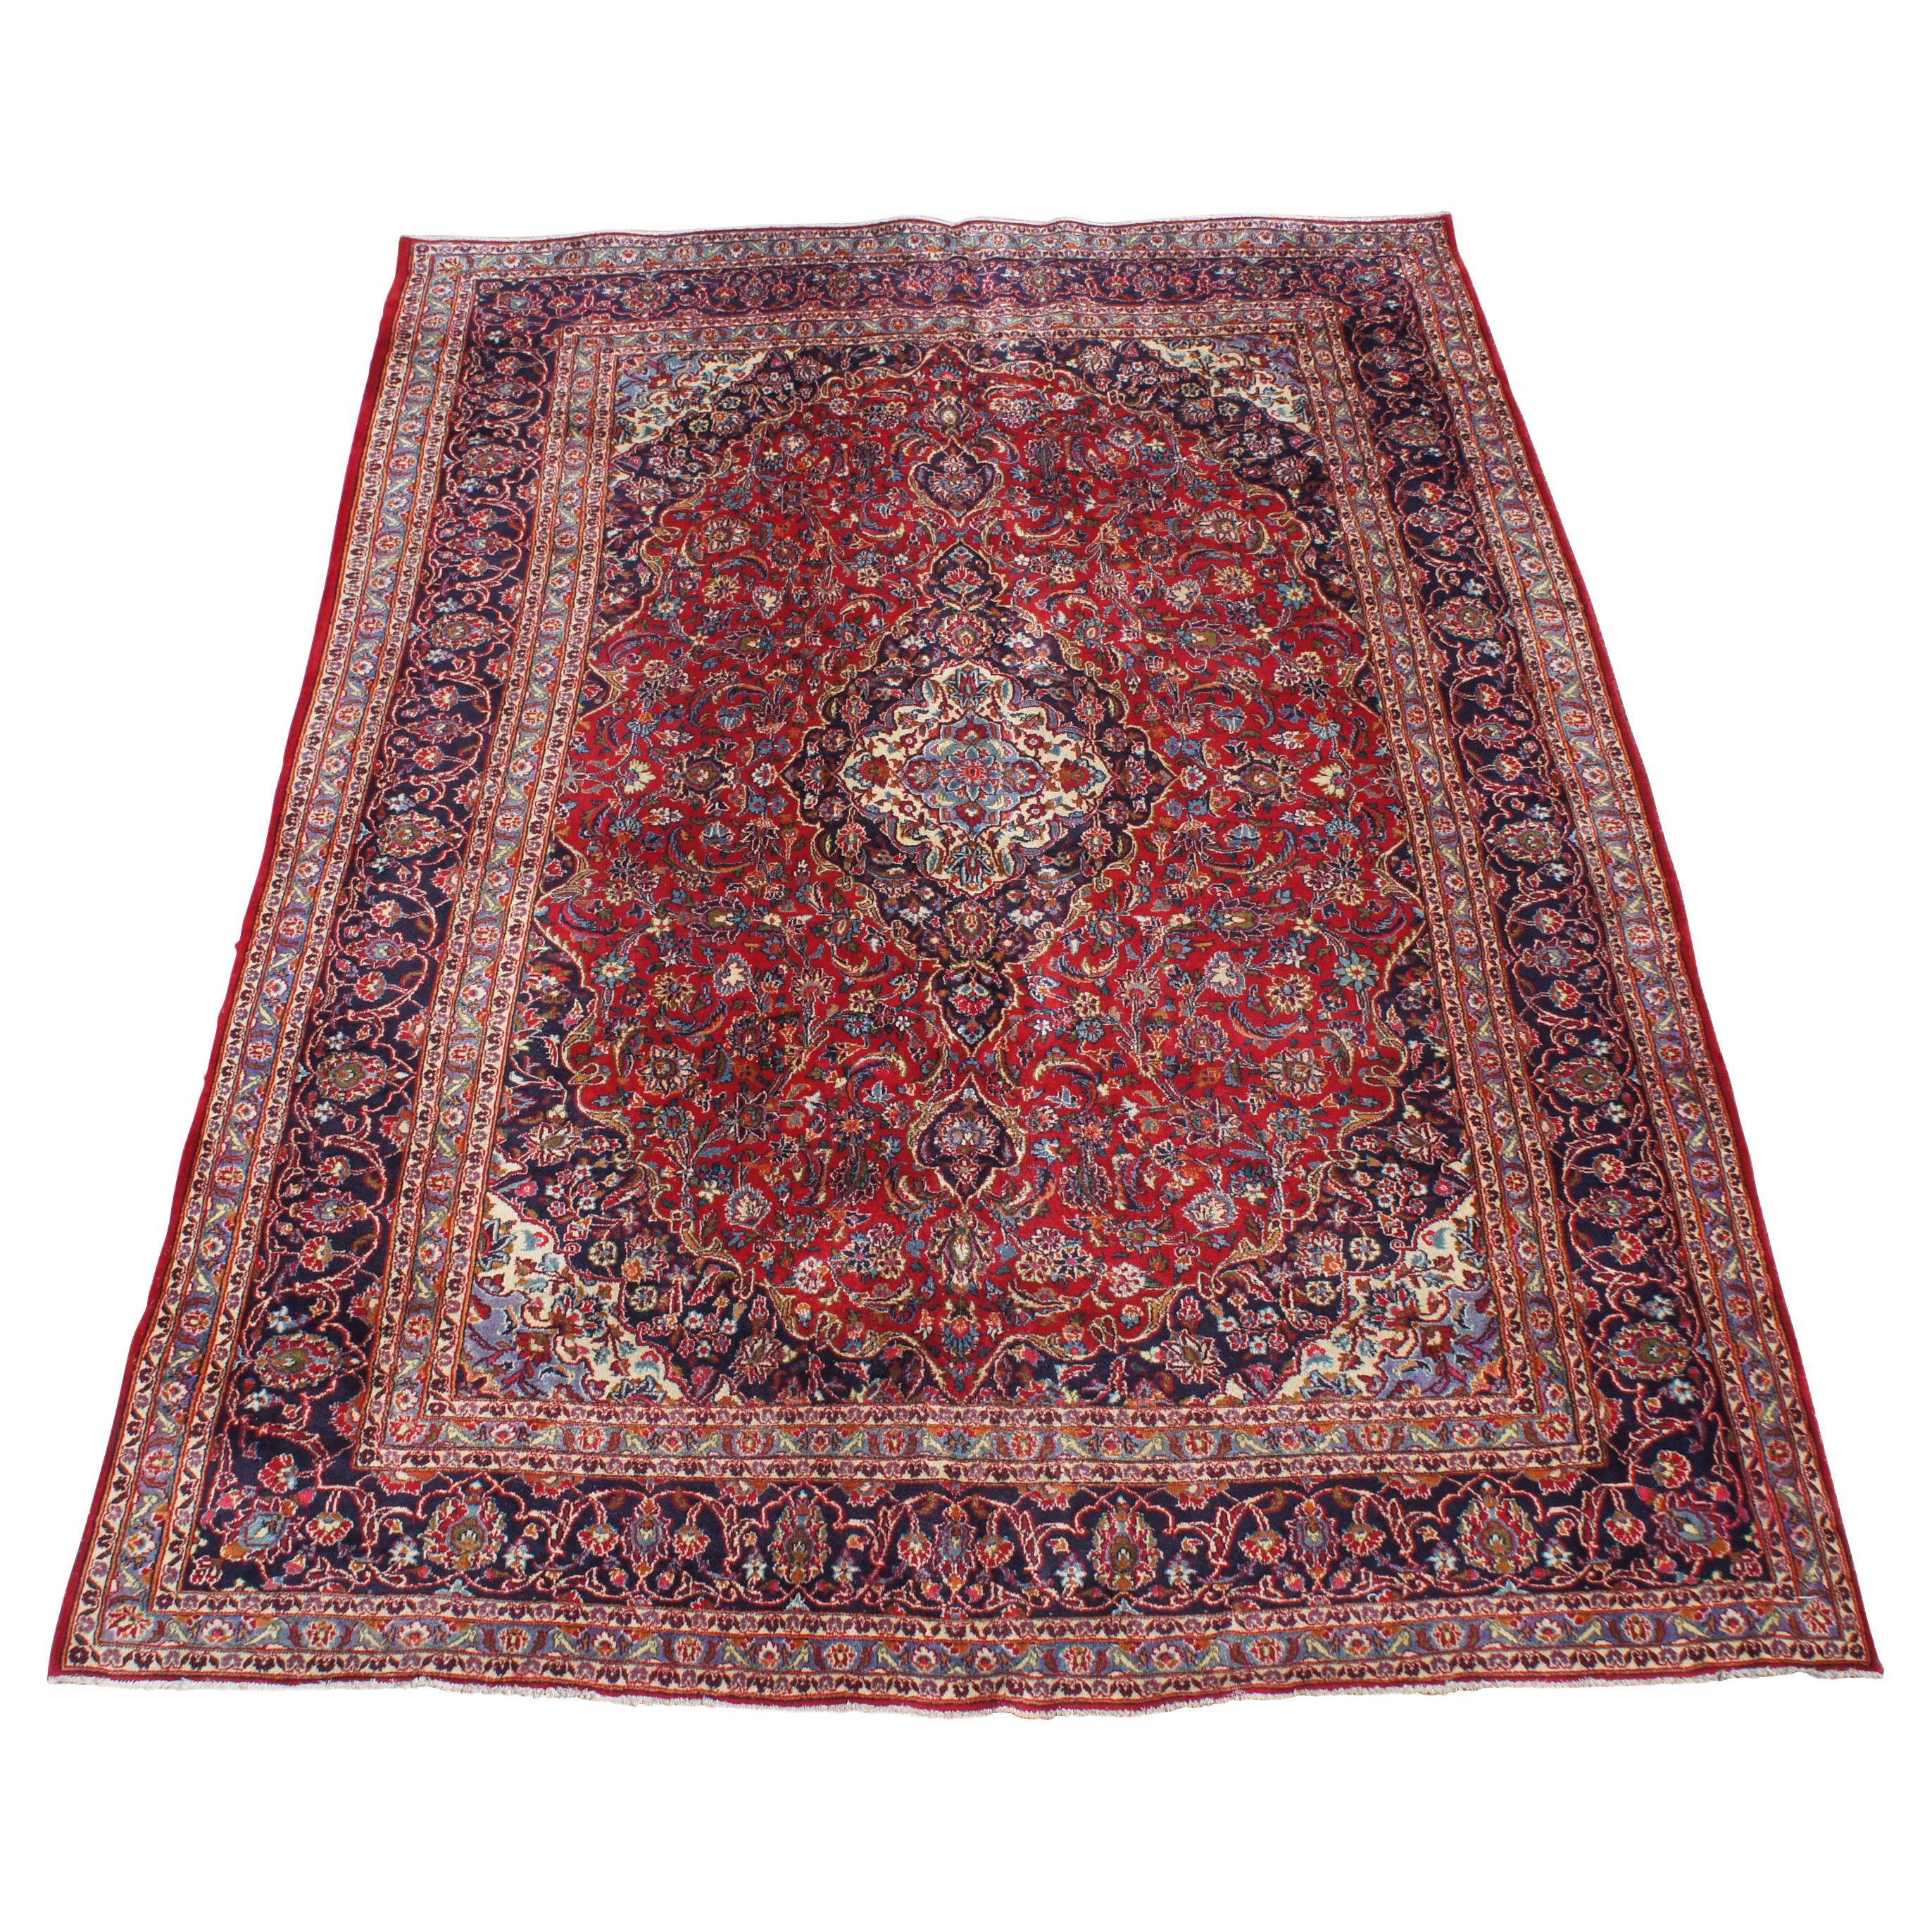 Mid-20th Century Hand Knotted Persian Keshan Wool Area Rug Blue Red